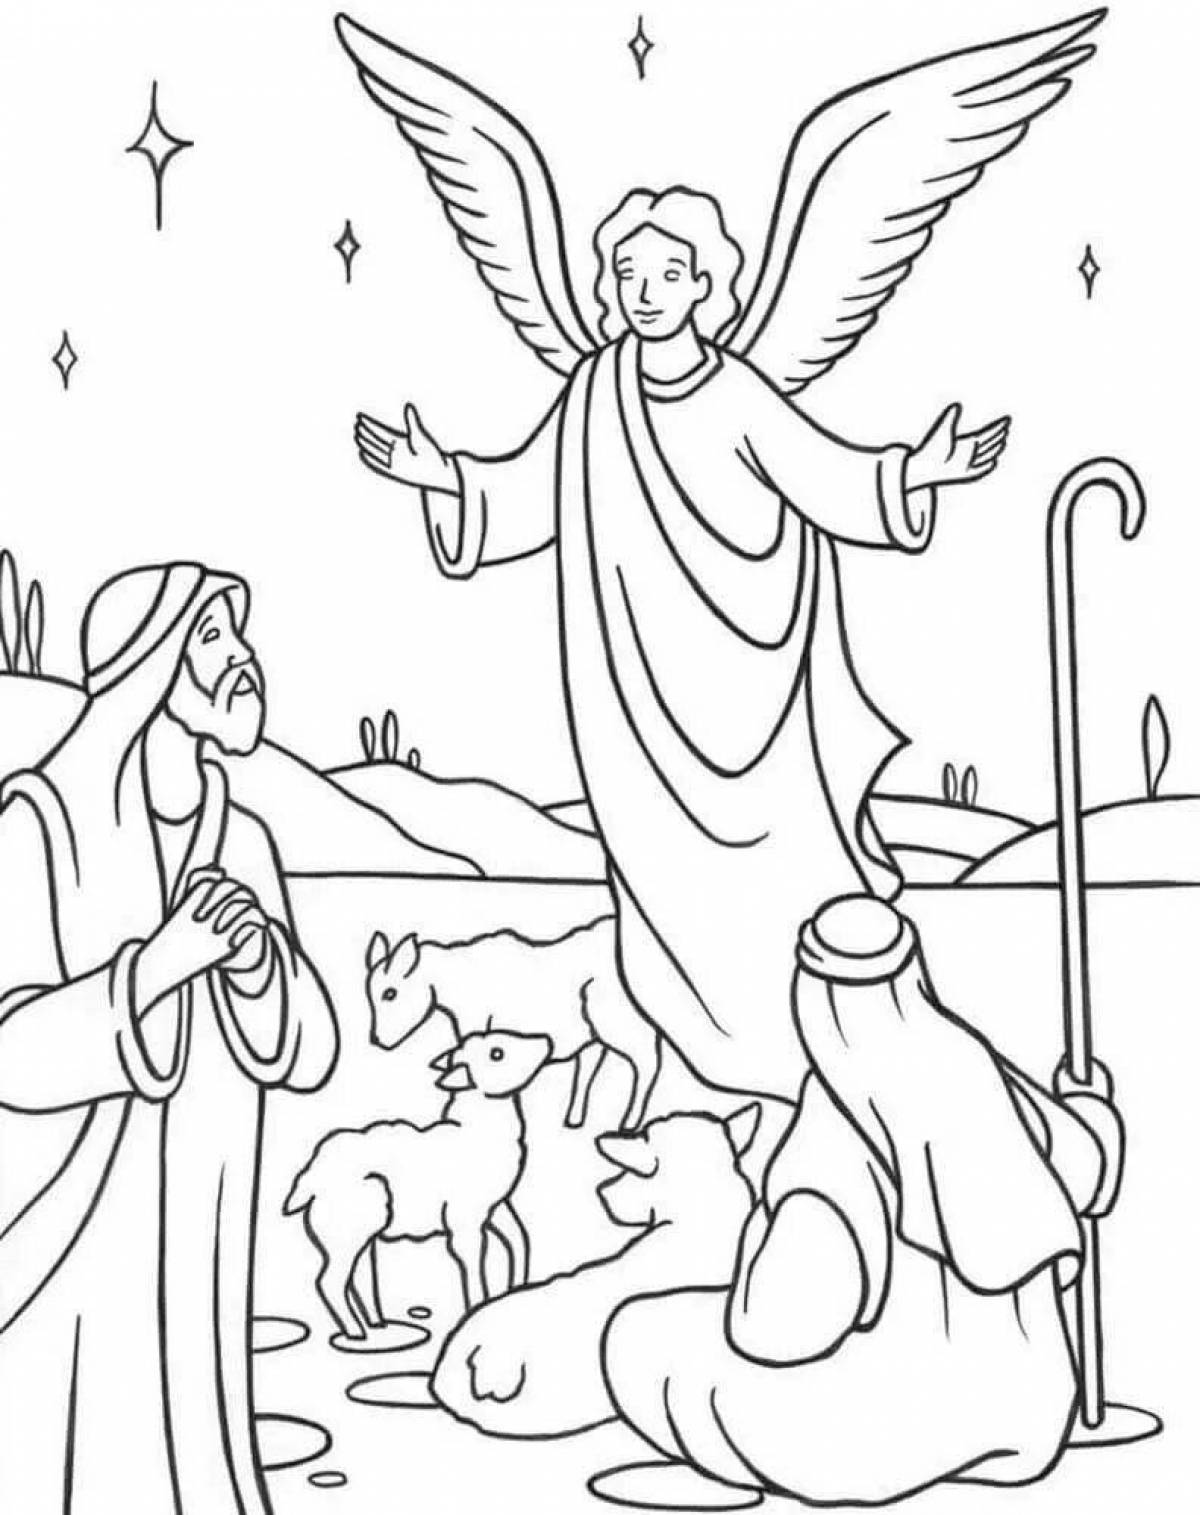 Gorgeous Christmas story coloring book